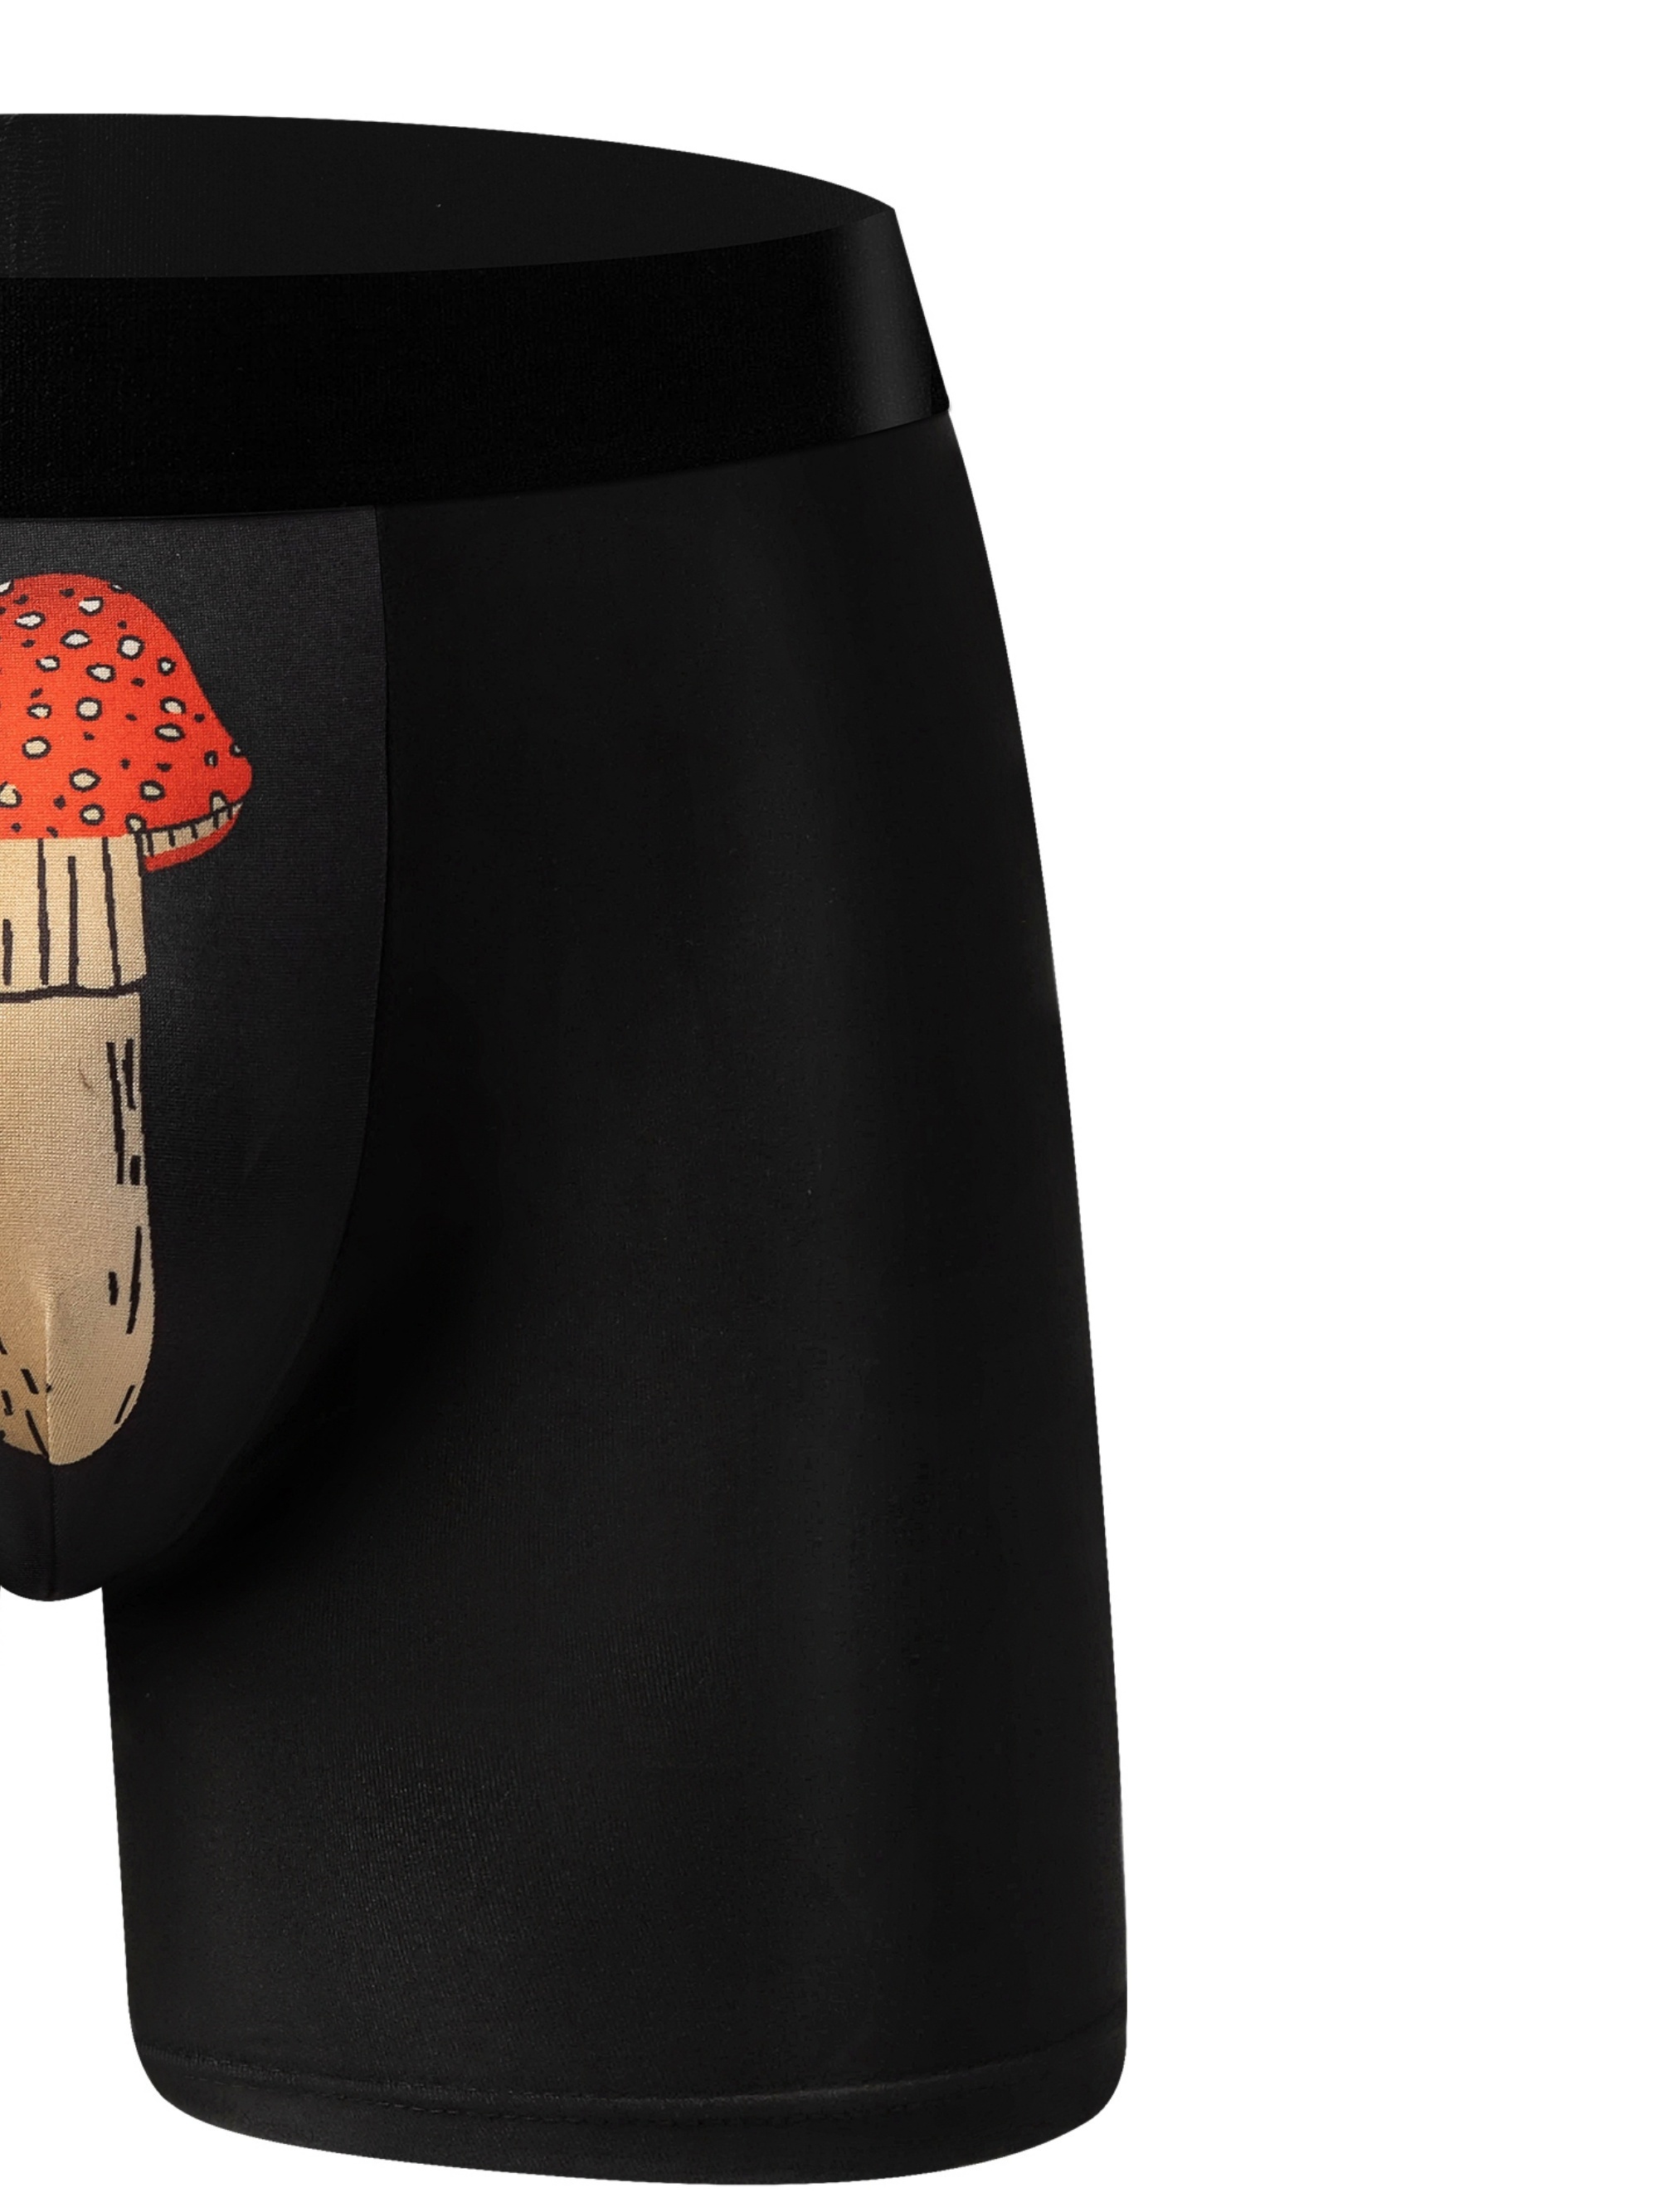 Vintage Designs Collection Mushroom Mushrooms Forest Underpants Panties  Male Underwear Comfortable Shorts Boxer Briefs - Boxers - AliExpress